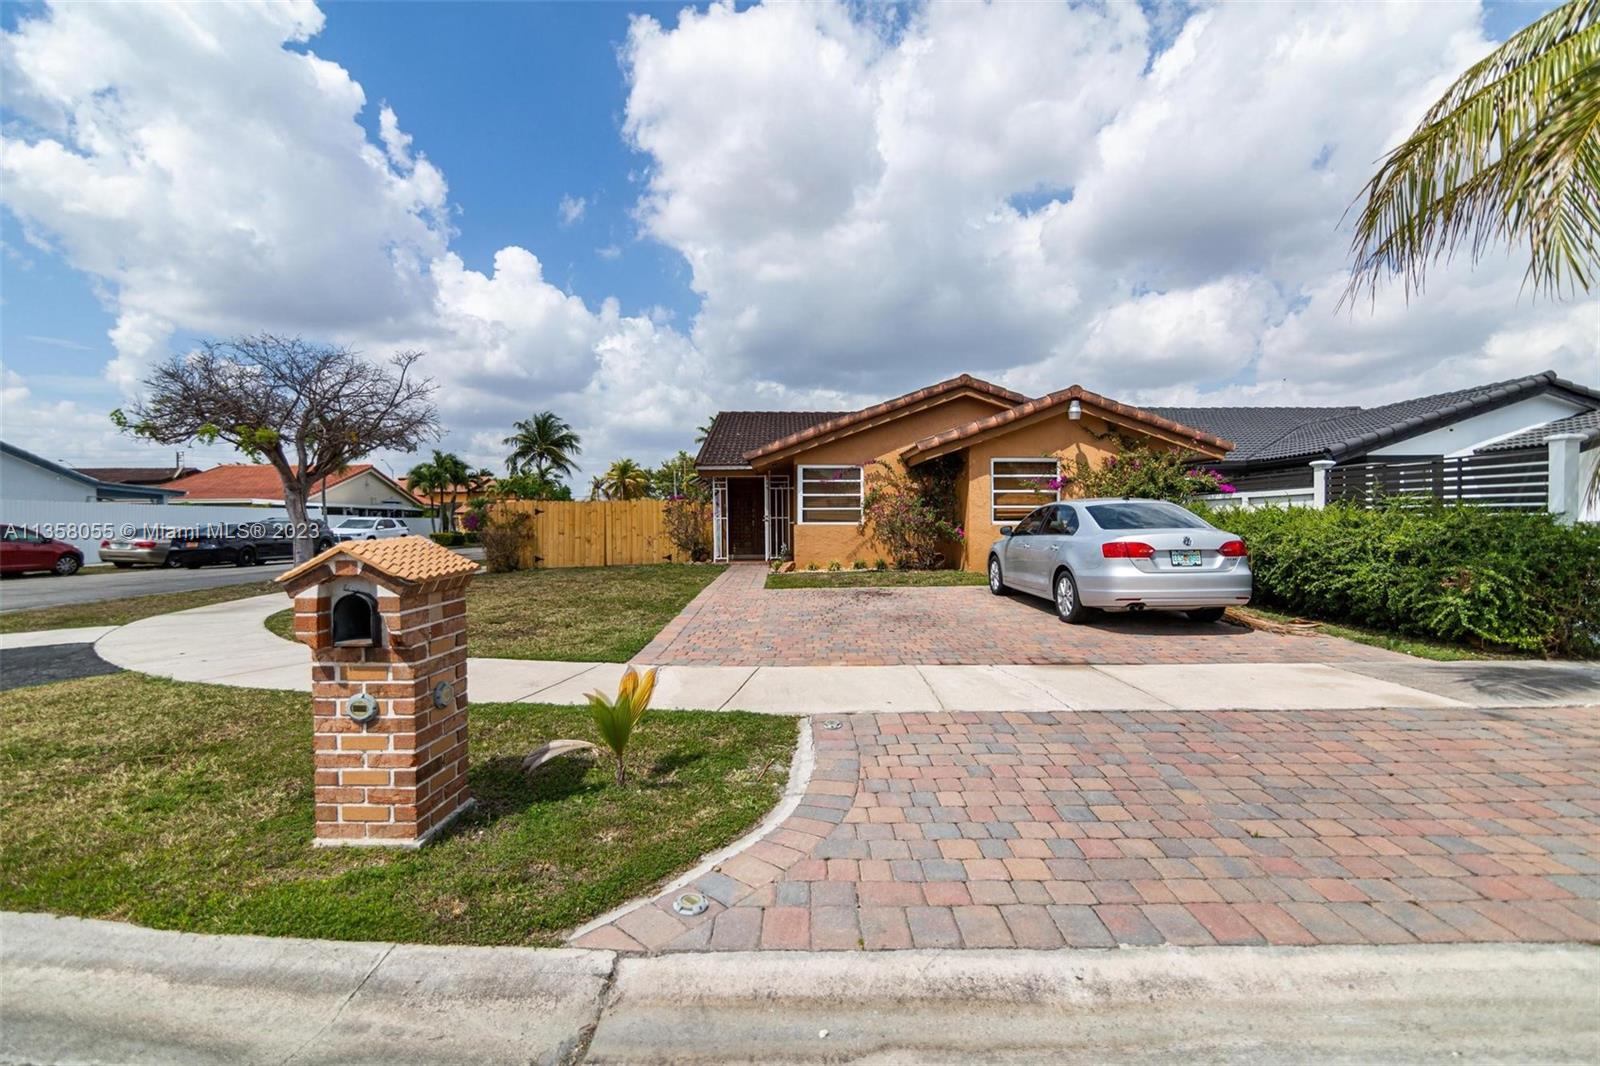 Great 3/2 corner lot home in the Tamiami area! This property features a brand new AC system, new wood fence and new driveway pavers. This home has ample yard space due to it being a corner lot to which the new owner can create their own outdoor sanctuary and entertainment areas. Located close to Islas Canarias, Turnpike, Coral Way,  the 137th Ave Extension and a lot of commercial shopping! Very easy to show! See attachments for Floor plan, Updates & Improvements and 3D tour is available under Virtual Tour!